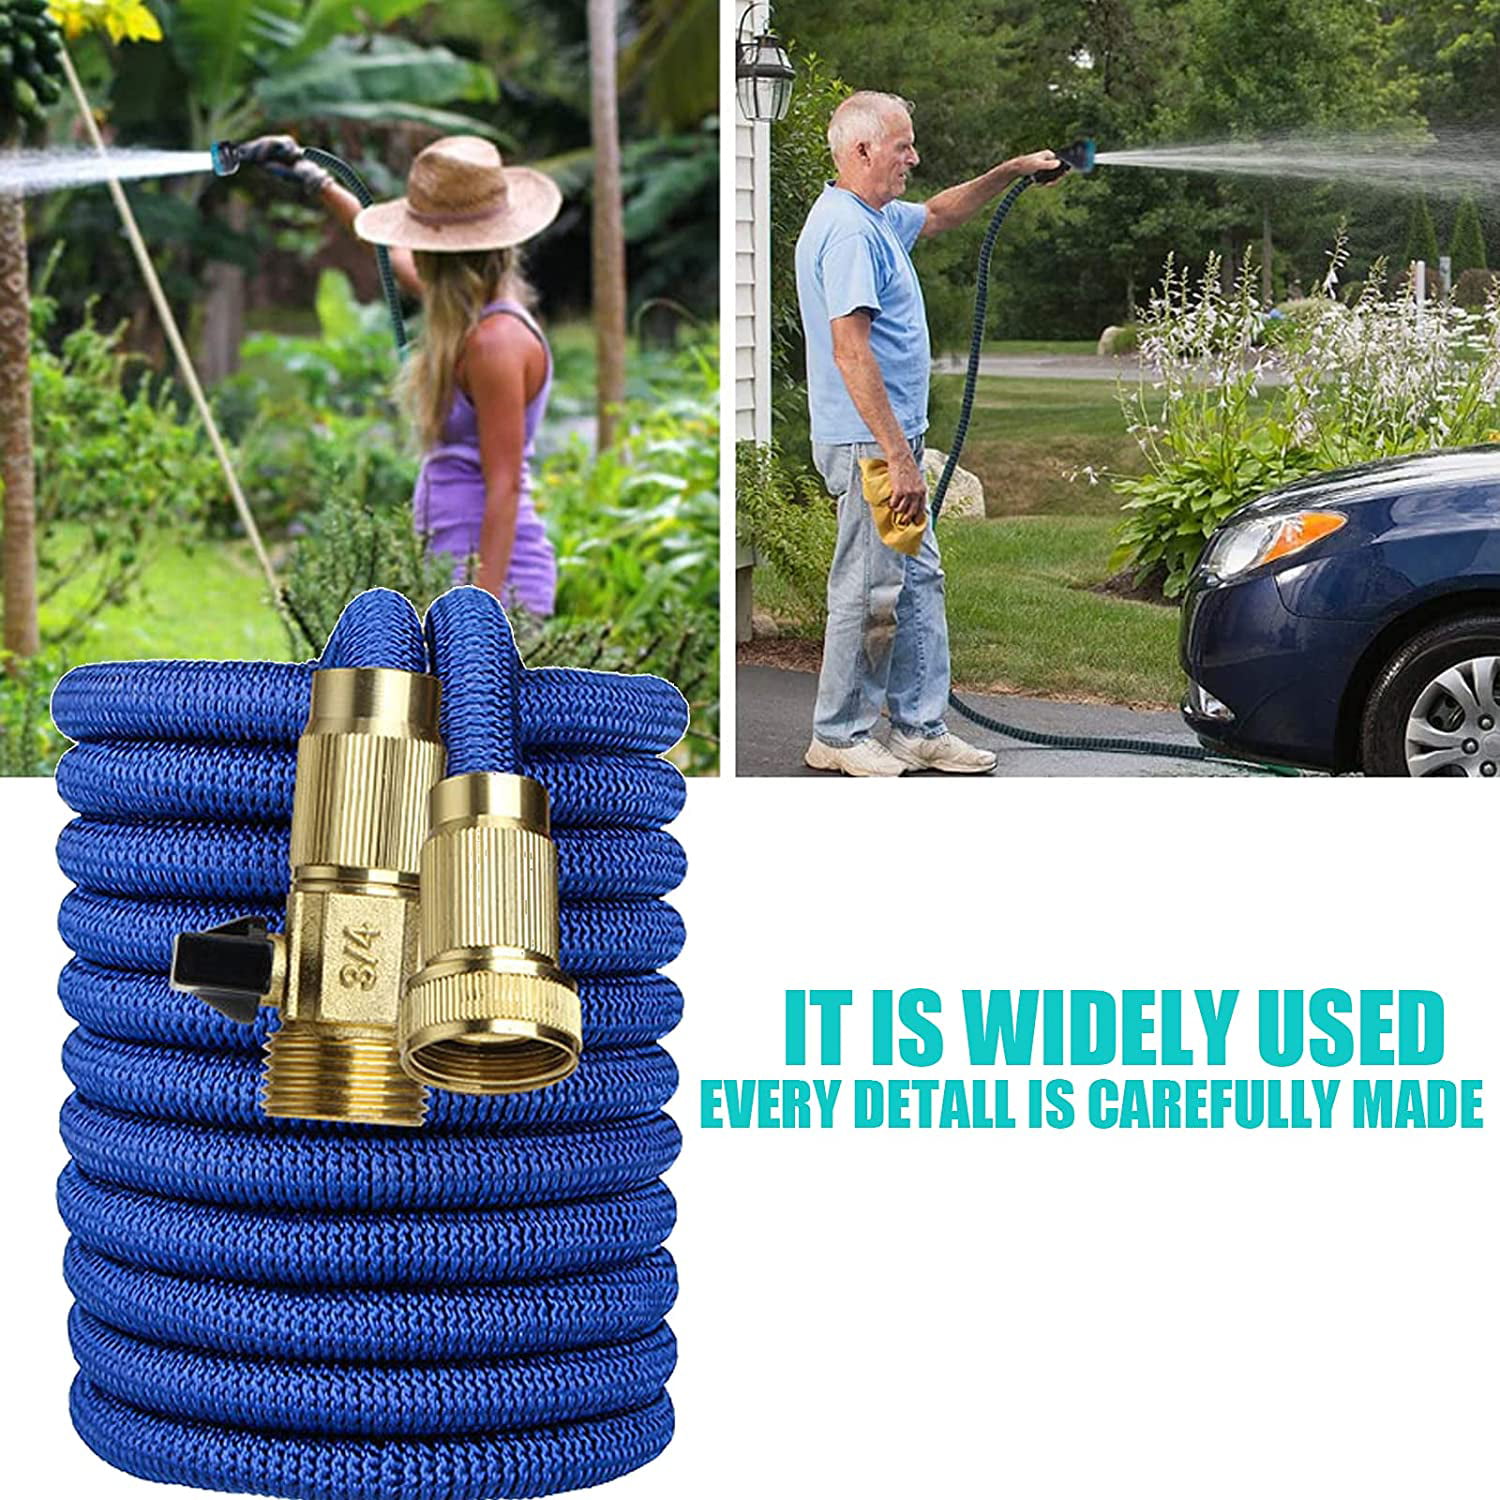 Lightweight Easy Storage 3/4 Inch Solid Brass Fittings and Double Latex Core 25/50/75/100 FT No-Kink Flexible Water Hose Blue,75 FT Yudaokeji Upgraded Best Expandable Garden Hose 